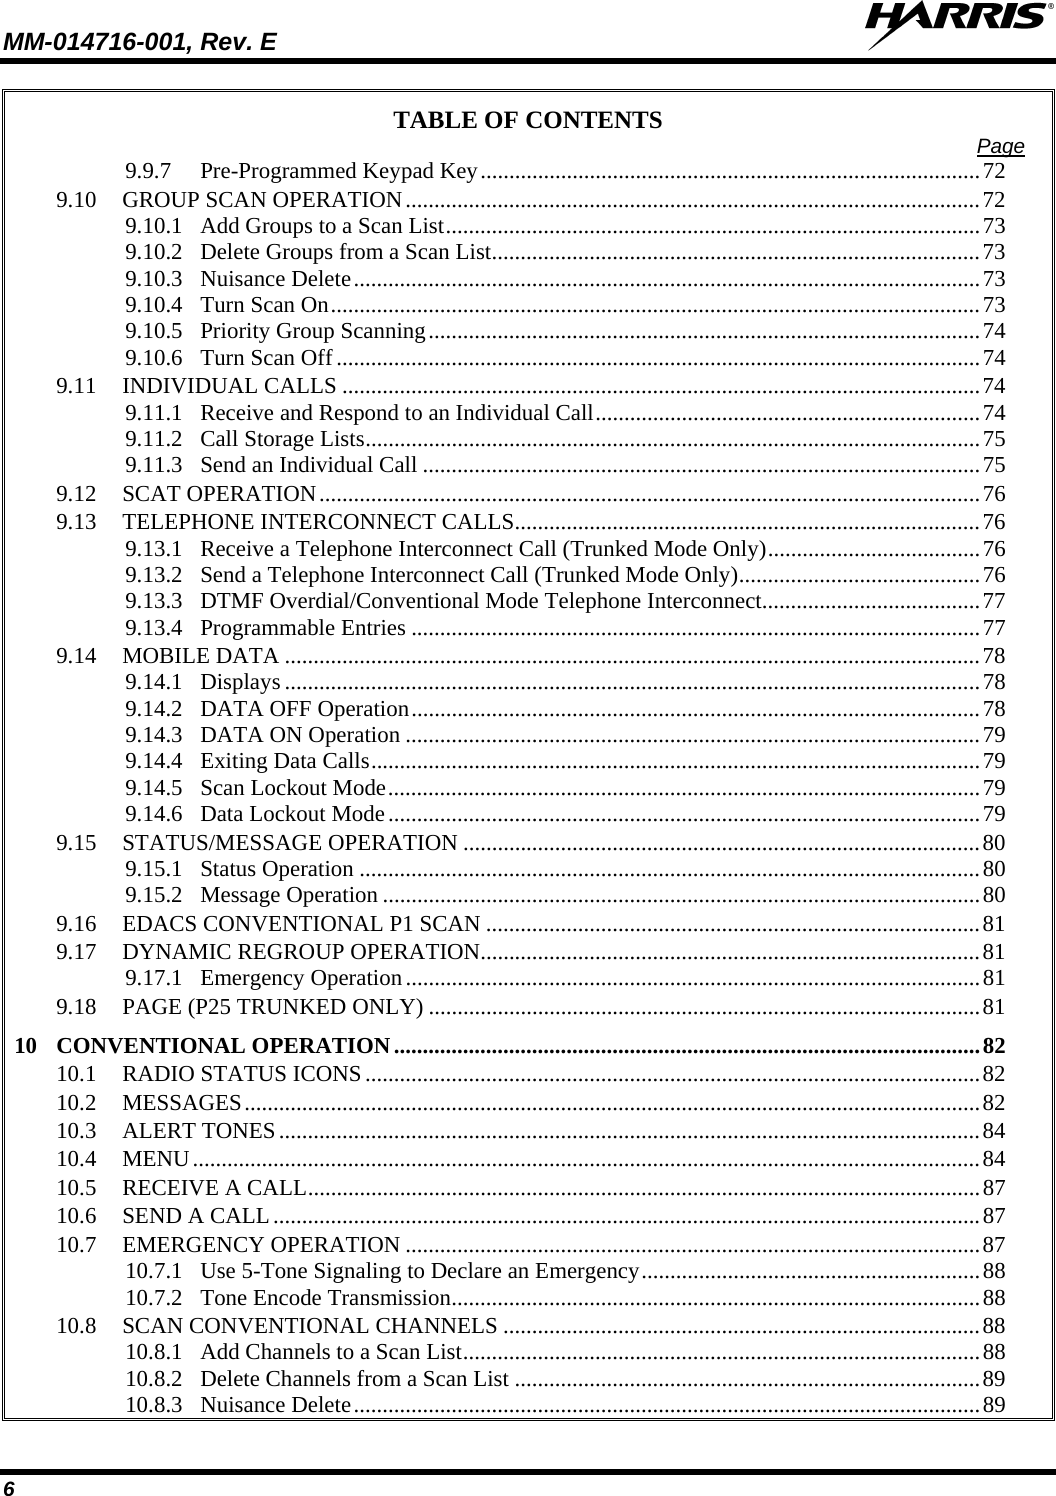 MM-014716-001, Rev. E  6 TABLE OF CONTENTS  Page 9.9.7 Pre-Programmed Keypad Key.......................................................................................72 9.10 GROUP SCAN OPERATION....................................................................................................72 9.10.1 Add Groups to a Scan List.............................................................................................73 9.10.2 Delete Groups from a Scan List.....................................................................................73 9.10.3 Nuisance Delete.............................................................................................................73 9.10.4 Turn Scan On.................................................................................................................73 9.10.5 Priority Group Scanning................................................................................................74 9.10.6 Turn Scan Off................................................................................................................74 9.11 INDIVIDUAL CALLS ...............................................................................................................74 9.11.1 Receive and Respond to an Individual Call...................................................................74 9.11.2 Call Storage Lists...........................................................................................................75 9.11.3 Send an Individual Call .................................................................................................75 9.12 SCAT OPERATION...................................................................................................................76 9.13 TELEPHONE INTERCONNECT CALLS.................................................................................76 9.13.1 Receive a Telephone Interconnect Call (Trunked Mode Only).....................................76 9.13.2 Send a Telephone Interconnect Call (Trunked Mode Only)..........................................76 9.13.3 DTMF Overdial/Conventional Mode Telephone Interconnect......................................77 9.13.4 Programmable Entries ...................................................................................................77 9.14 MOBILE DATA .........................................................................................................................78 9.14.1 Displays .........................................................................................................................78 9.14.2 DATA OFF Operation...................................................................................................78 9.14.3 DATA ON Operation ....................................................................................................79 9.14.4 Exiting Data Calls..........................................................................................................79 9.14.5 Scan Lockout Mode.......................................................................................................79 9.14.6 Data Lockout Mode.......................................................................................................79 9.15 STATUS/MESSAGE OPERATION ..........................................................................................80 9.15.1 Status Operation ............................................................................................................80 9.15.2 Message Operation ........................................................................................................80 9.16 EDACS CONVENTIONAL P1 SCAN ......................................................................................81 9.17 DYNAMIC REGROUP OPERATION.......................................................................................81 9.17.1 Emergency Operation....................................................................................................81 9.18 PAGE (P25 TRUNKED ONLY) ................................................................................................81 10 CONVENTIONAL OPERATION......................................................................................................82 10.1 RADIO STATUS ICONS...........................................................................................................82 10.2 MESSAGES................................................................................................................................82 10.3 ALERT TONES..........................................................................................................................84 10.4 MENU.........................................................................................................................................84 10.5 RECEIVE A CALL.....................................................................................................................87 10.6 SEND A CALL...........................................................................................................................87 10.7 EMERGENCY OPERATION ....................................................................................................87 10.7.1 Use 5-Tone Signaling to Declare an Emergency...........................................................88 10.7.2 Tone Encode Transmission............................................................................................88 10.8 SCAN CONVENTIONAL CHANNELS ...................................................................................88 10.8.1 Add Channels to a Scan List..........................................................................................88 10.8.2 Delete Channels from a Scan List .................................................................................89 10.8.3 Nuisance Delete.............................................................................................................89 